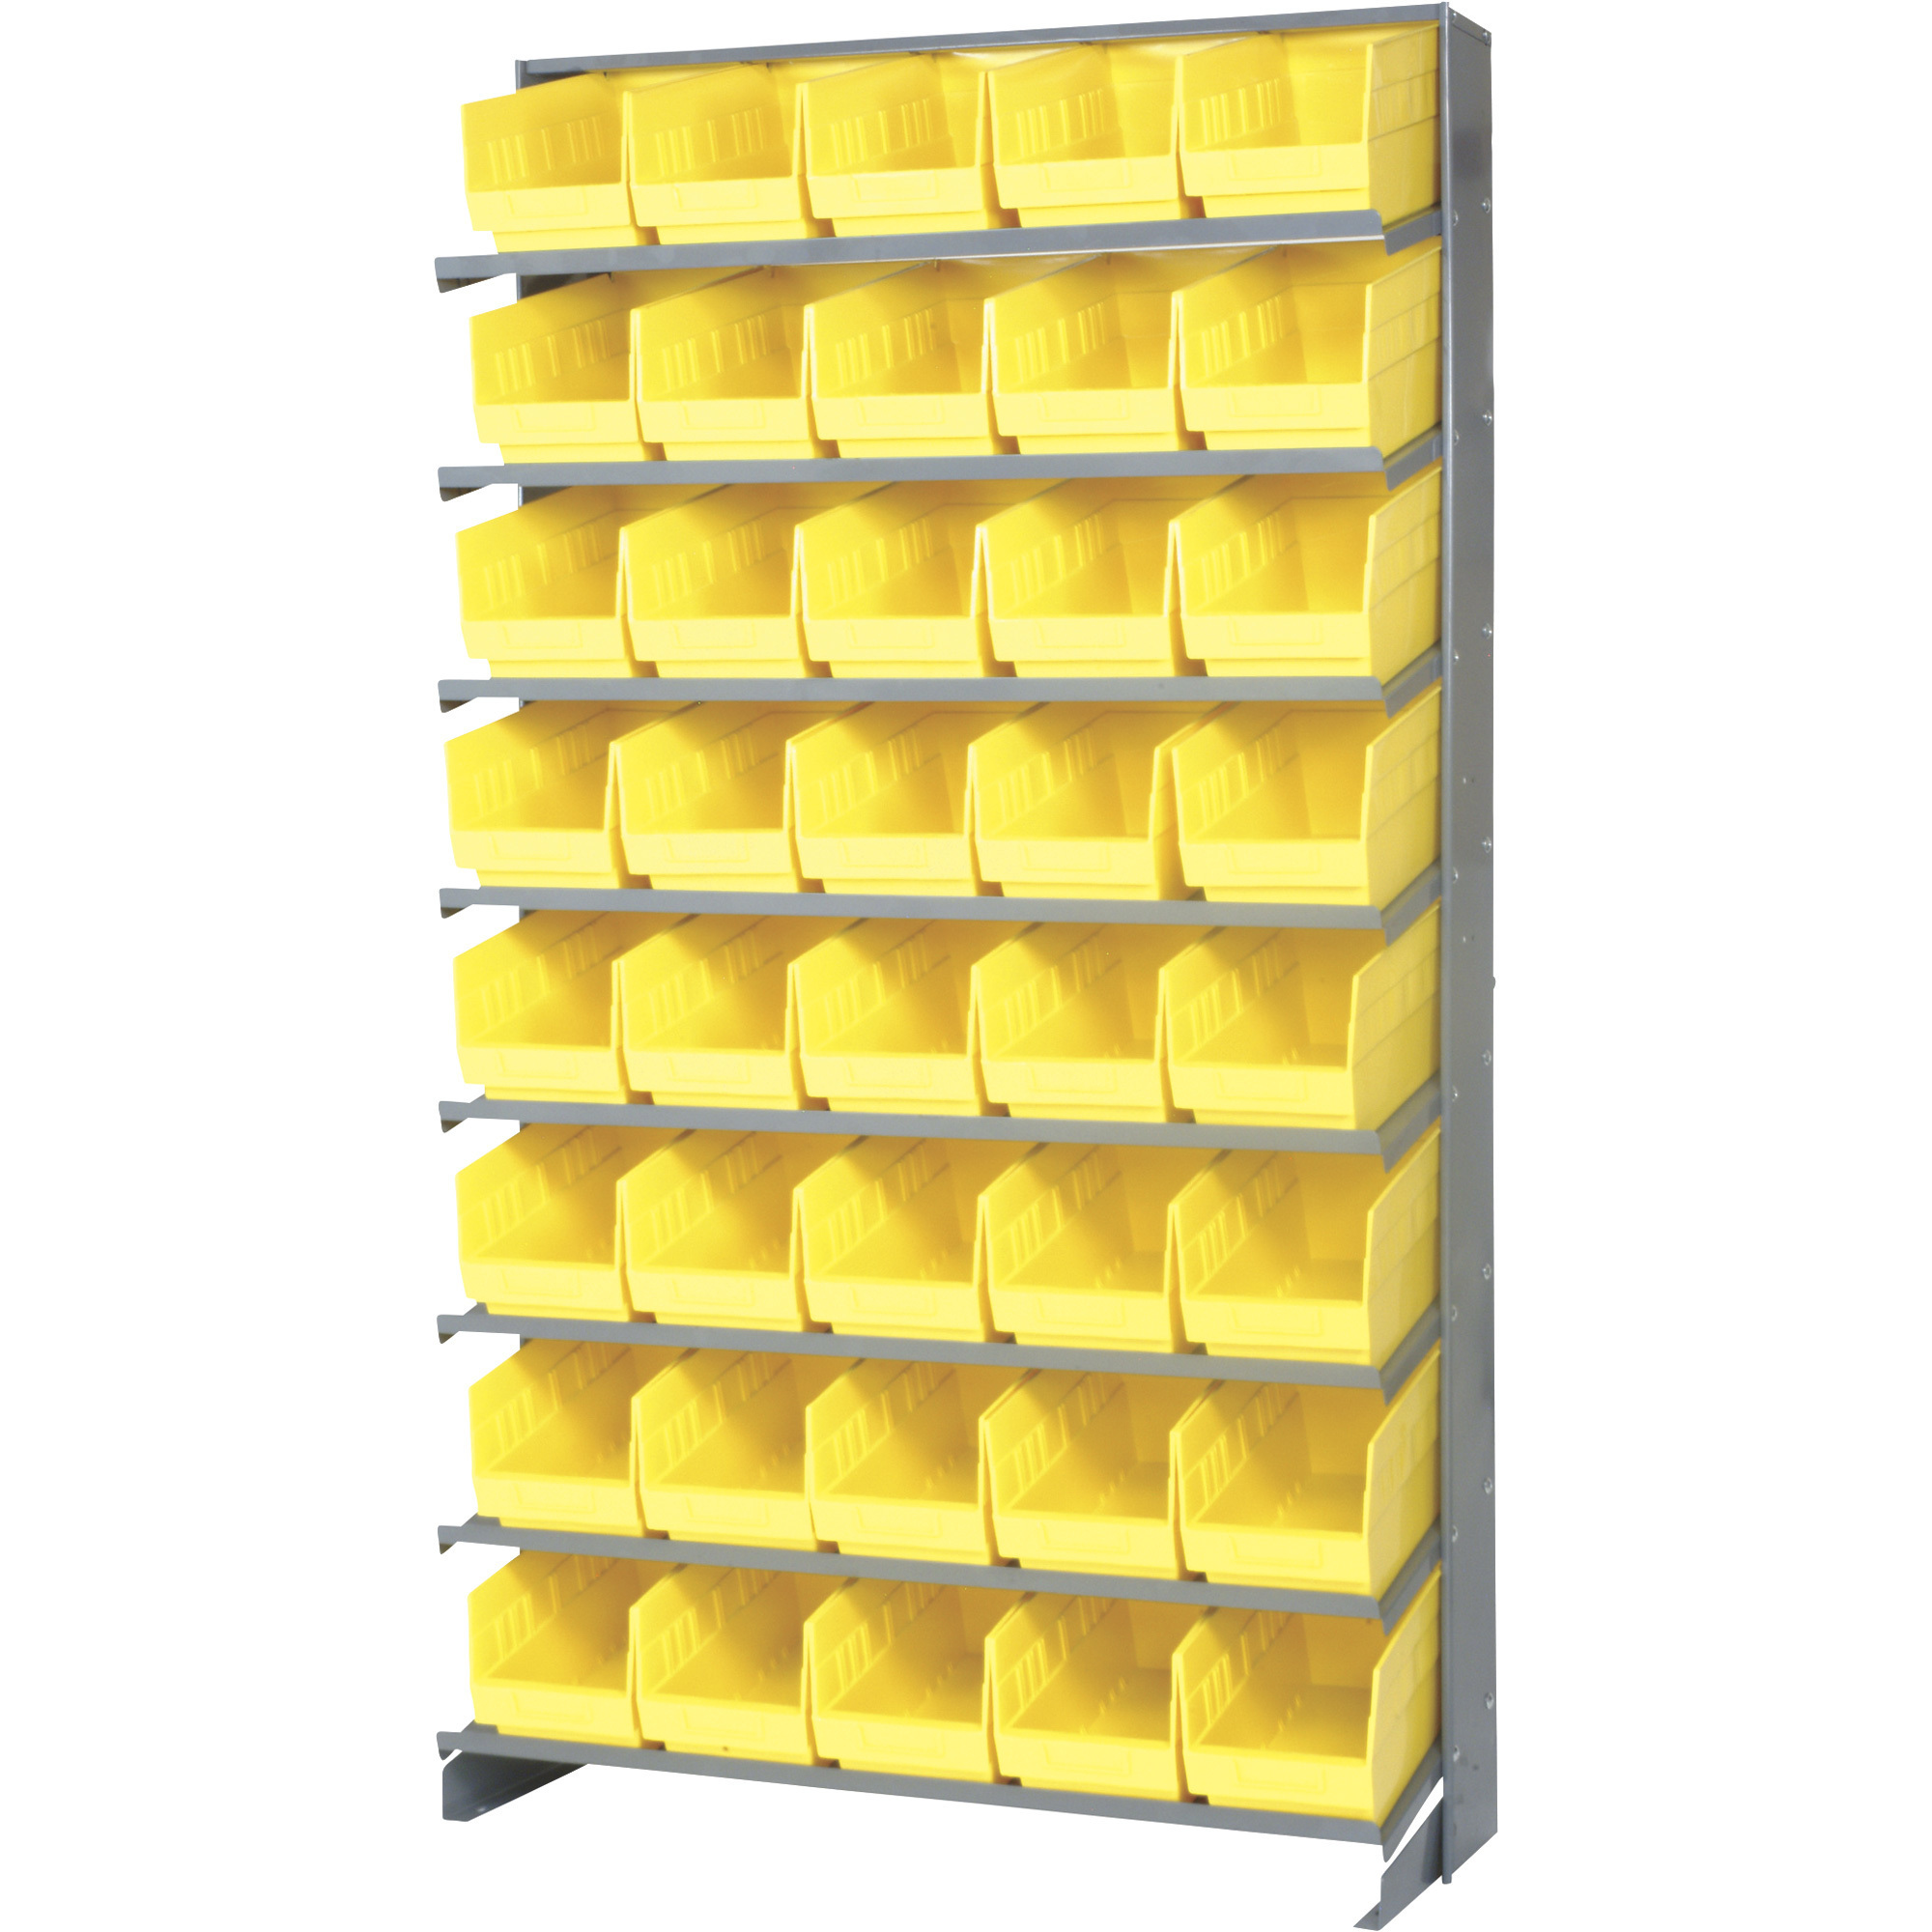 Quantum Storage Store-More Single Side Sloped Shelving Unit With 40 Bins, 36Inch W x 12Inch D x 60Inch H, Yellow, Model QPRS-202YL